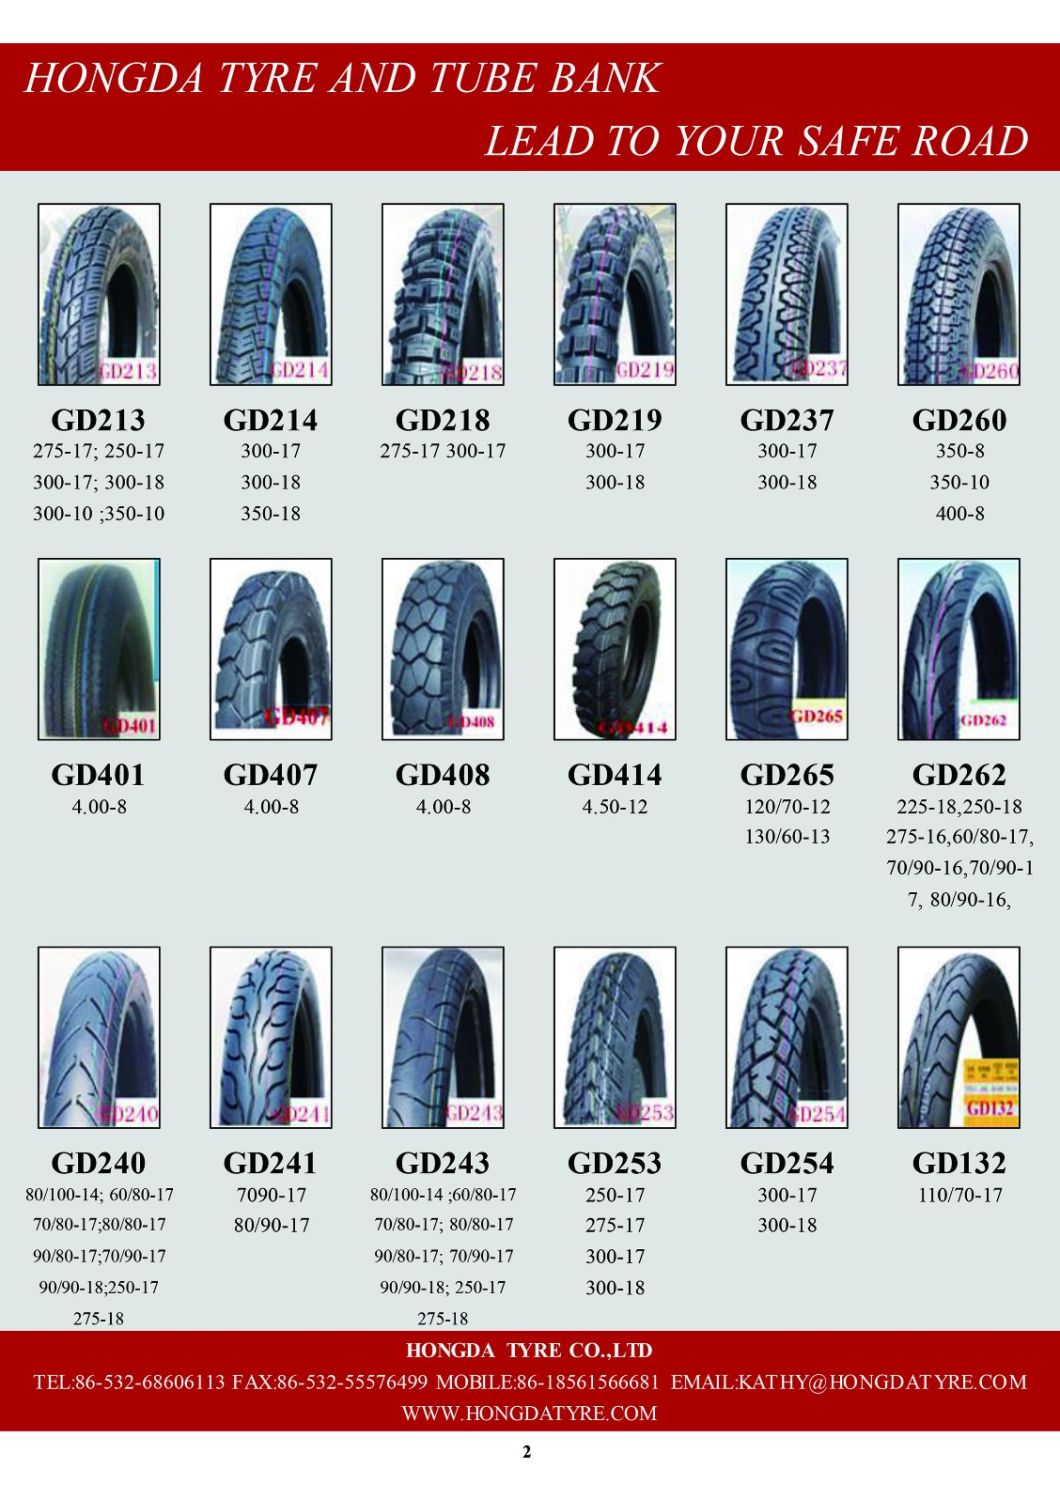 The Cheapest Tubeless Motorcycle Tire /Motorcycle Tyre 110/90-16 130/60-13 120/80-17 100/90-17, 110/90-18, 140/70-18, 100/90-18, 90/90-18, 410-18